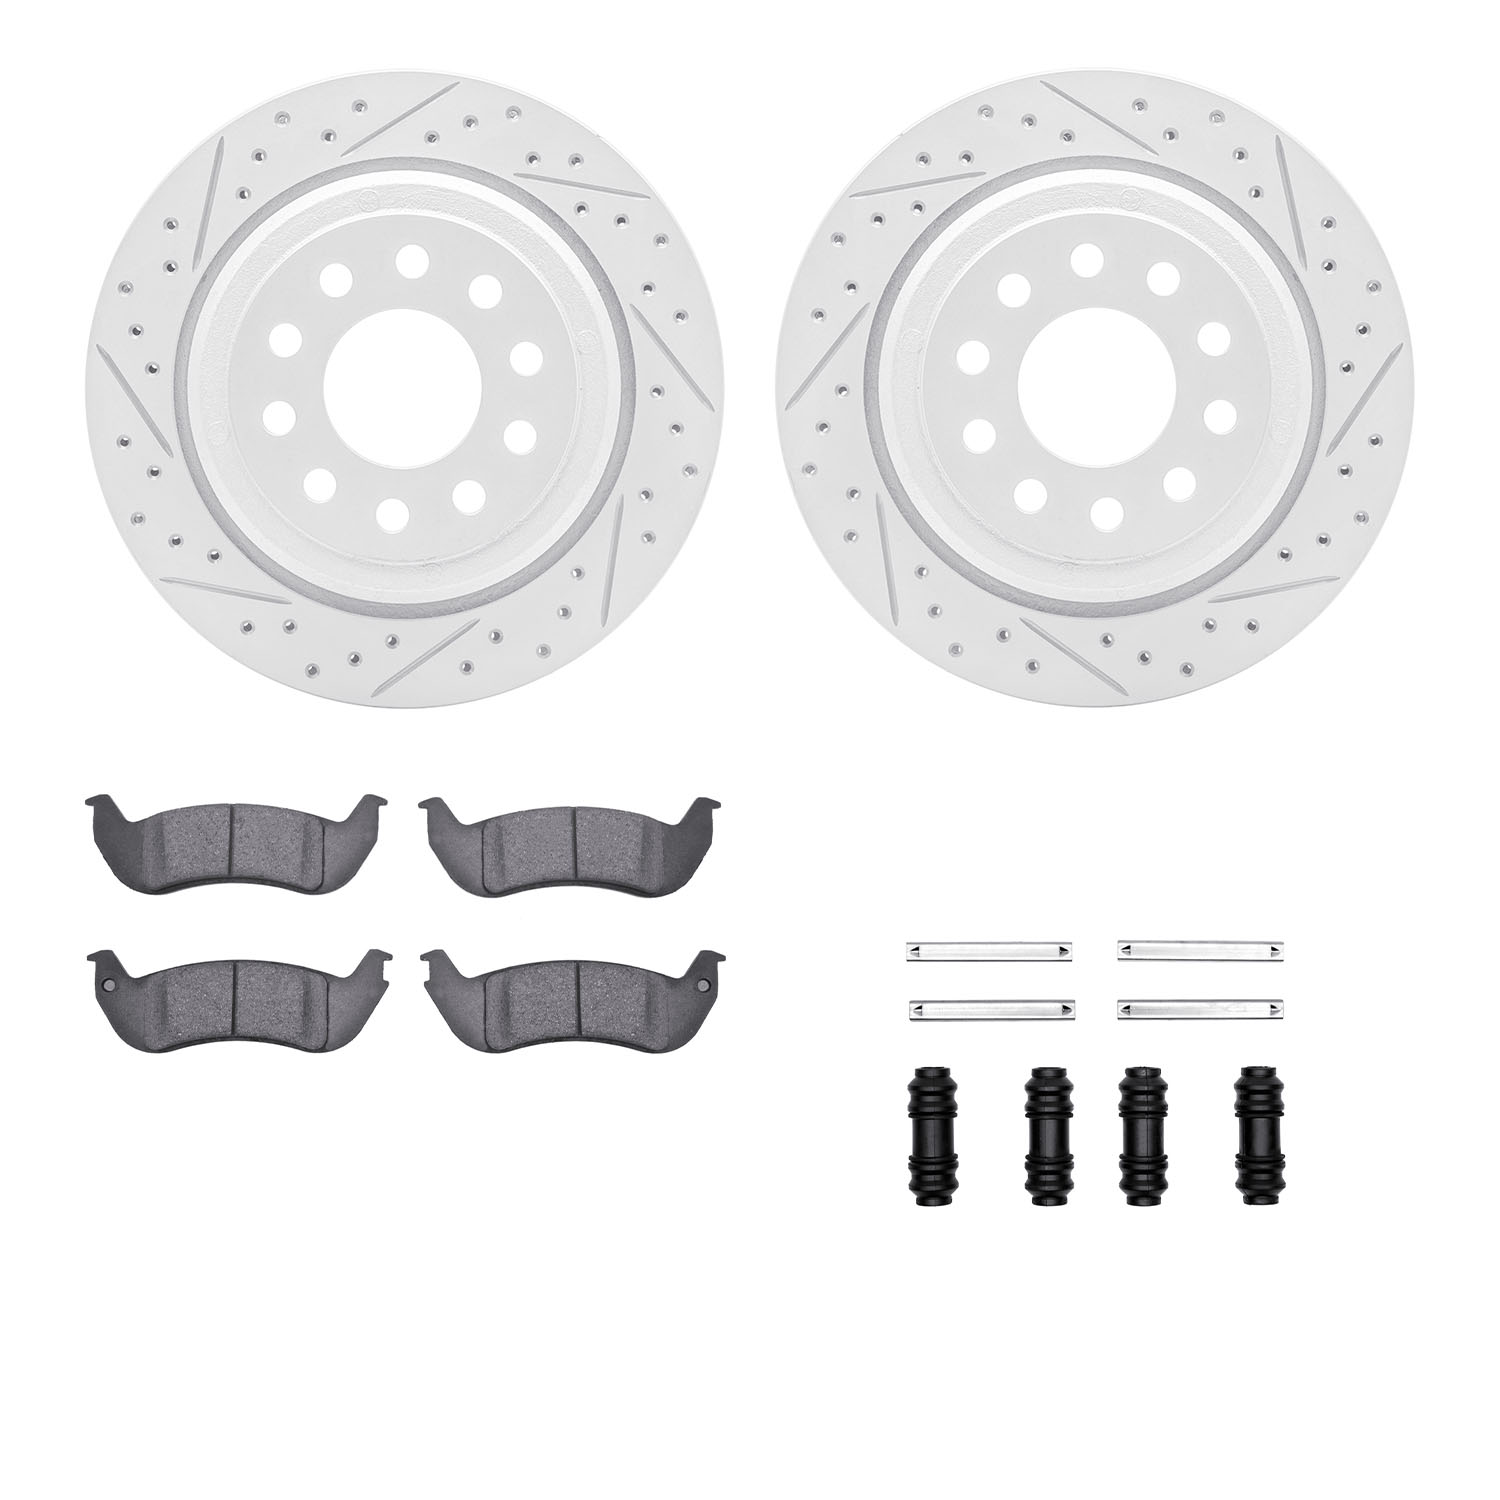 2212-55001 Geoperformance Drilled/Slotted Rotors w/Heavy-Duty Pads Kit & Hardware, 2003-2011 Ford/Lincoln/Mercury/Mazda, Positio